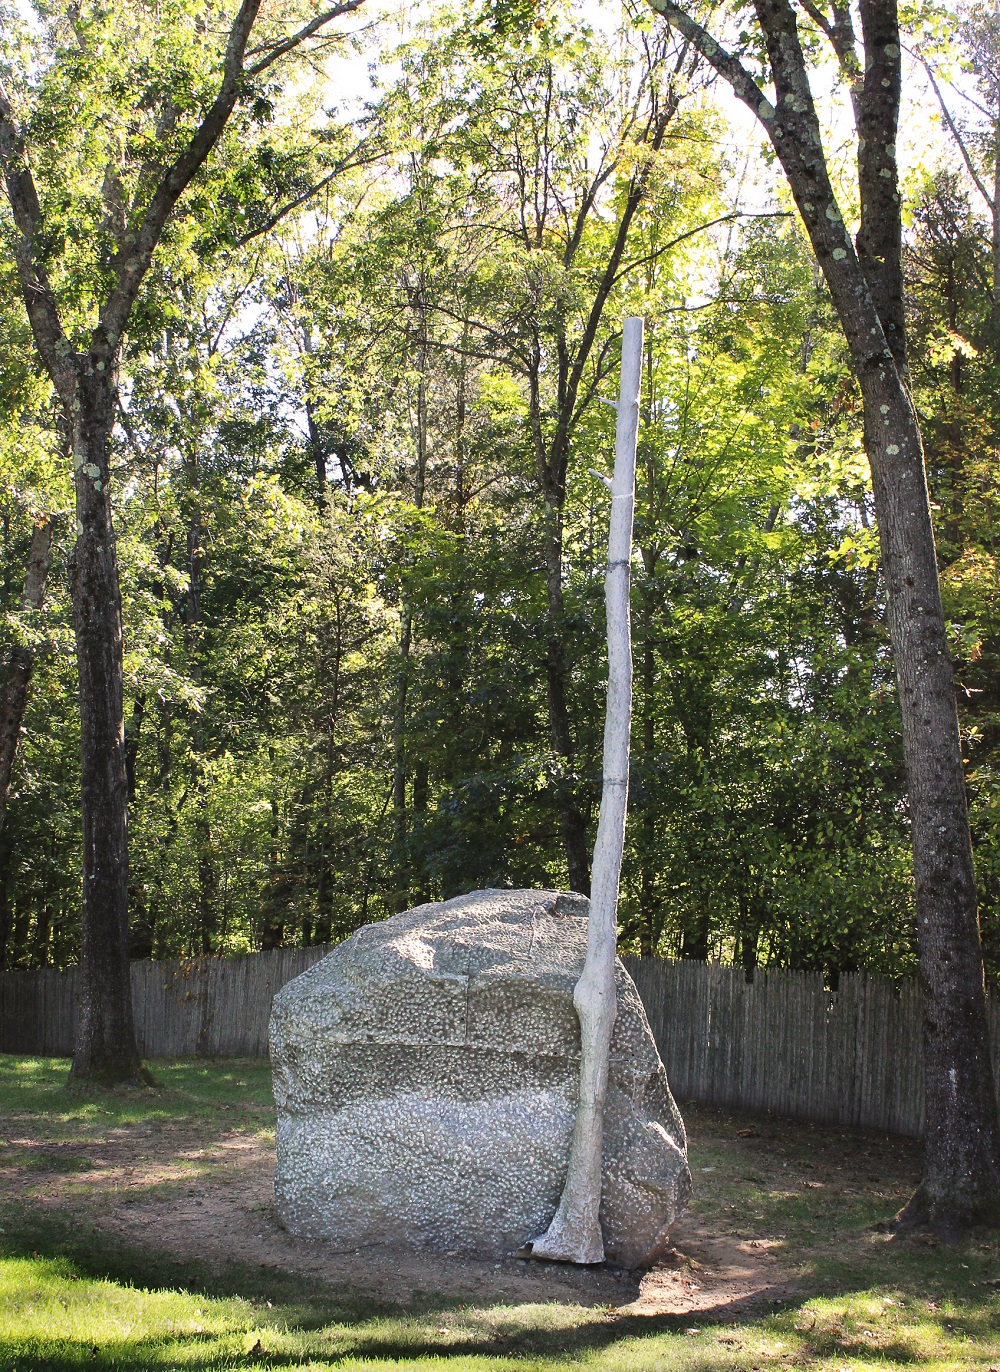 a sculpture of a rock and tree against live trees and green grass